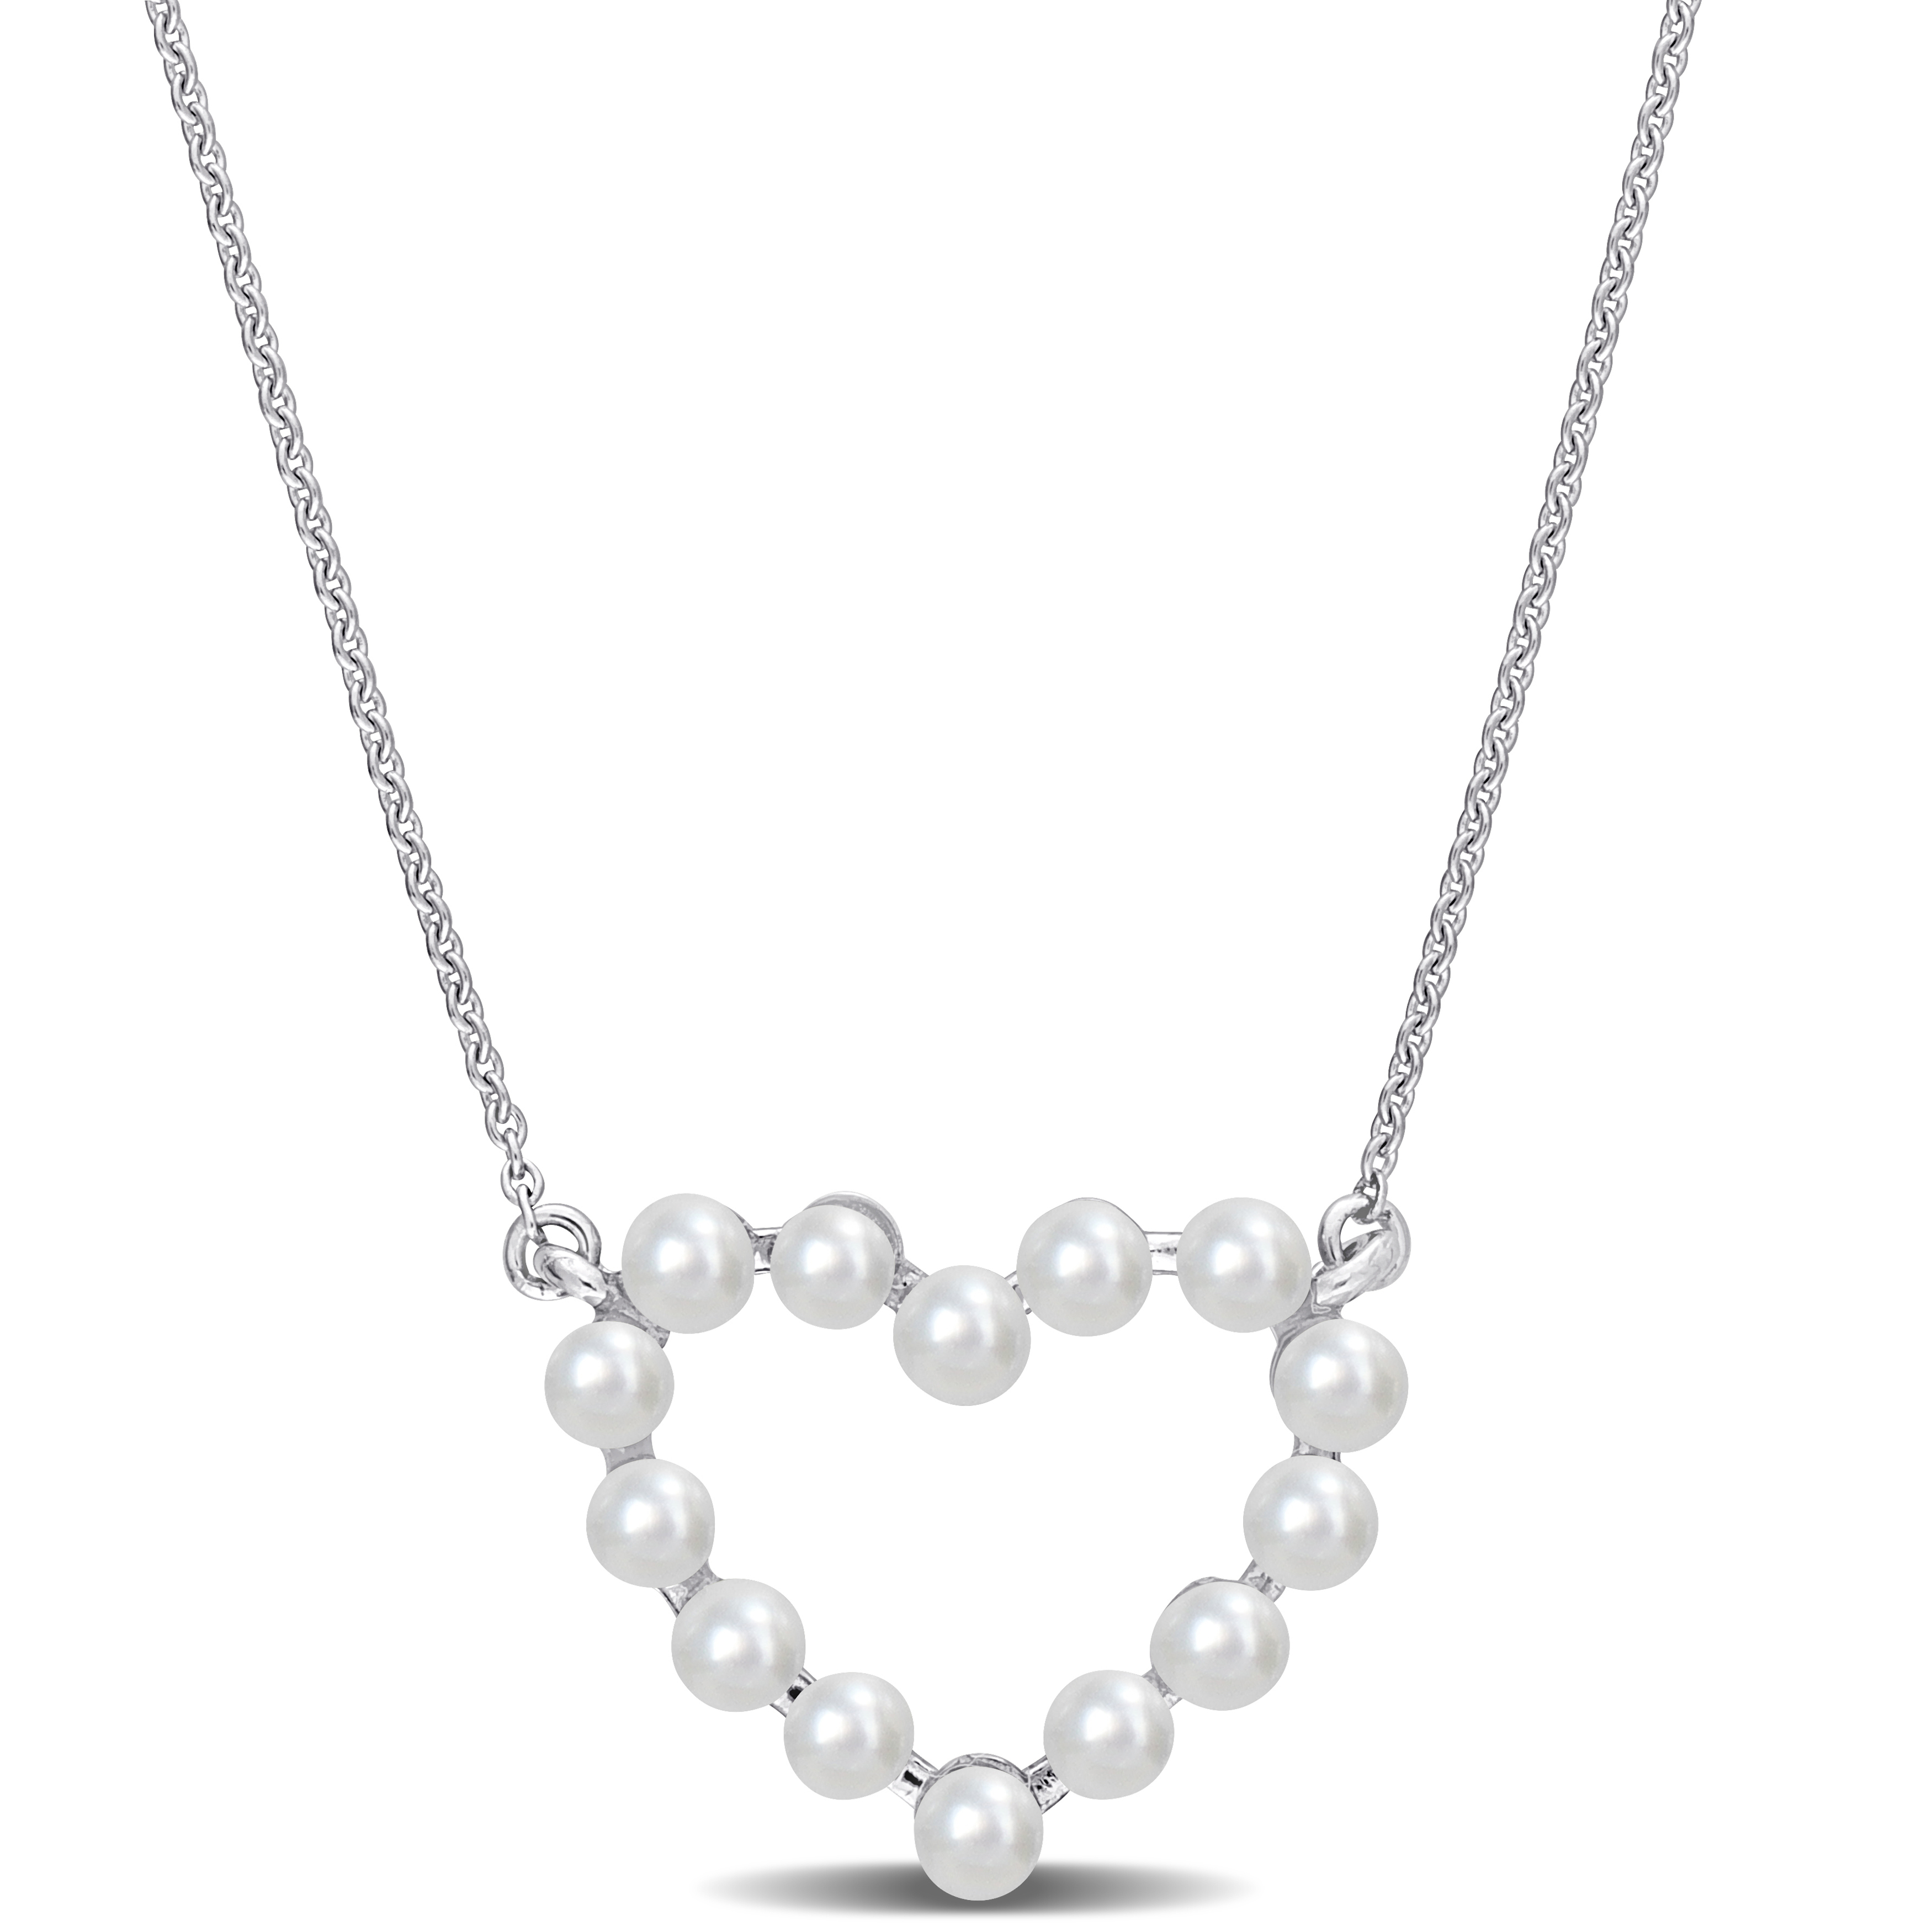 Pearl Heart Gold Chain Necklace Freshwater Pearls Black 